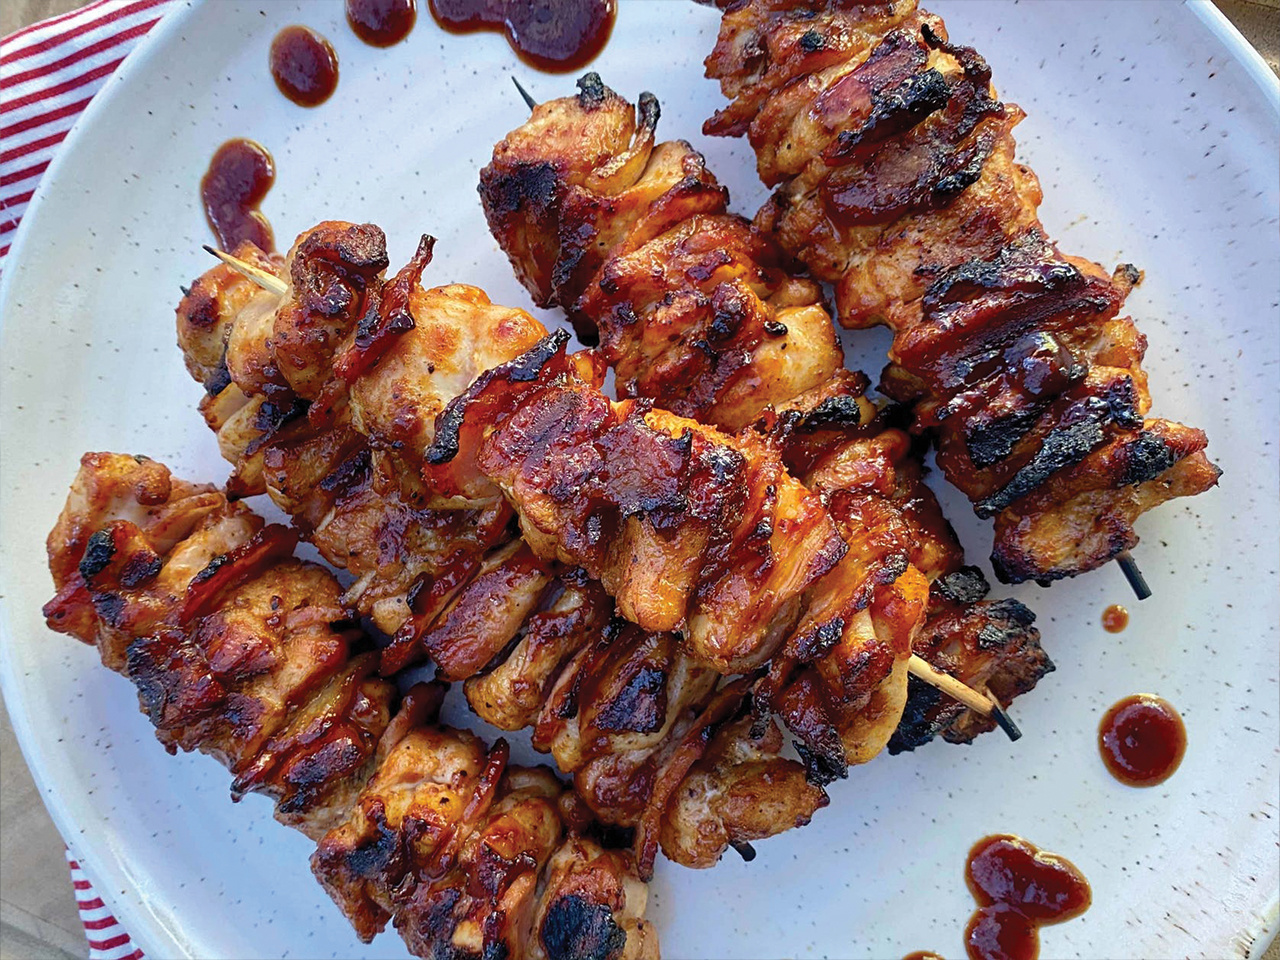  Chicken and Bacon Skewers

